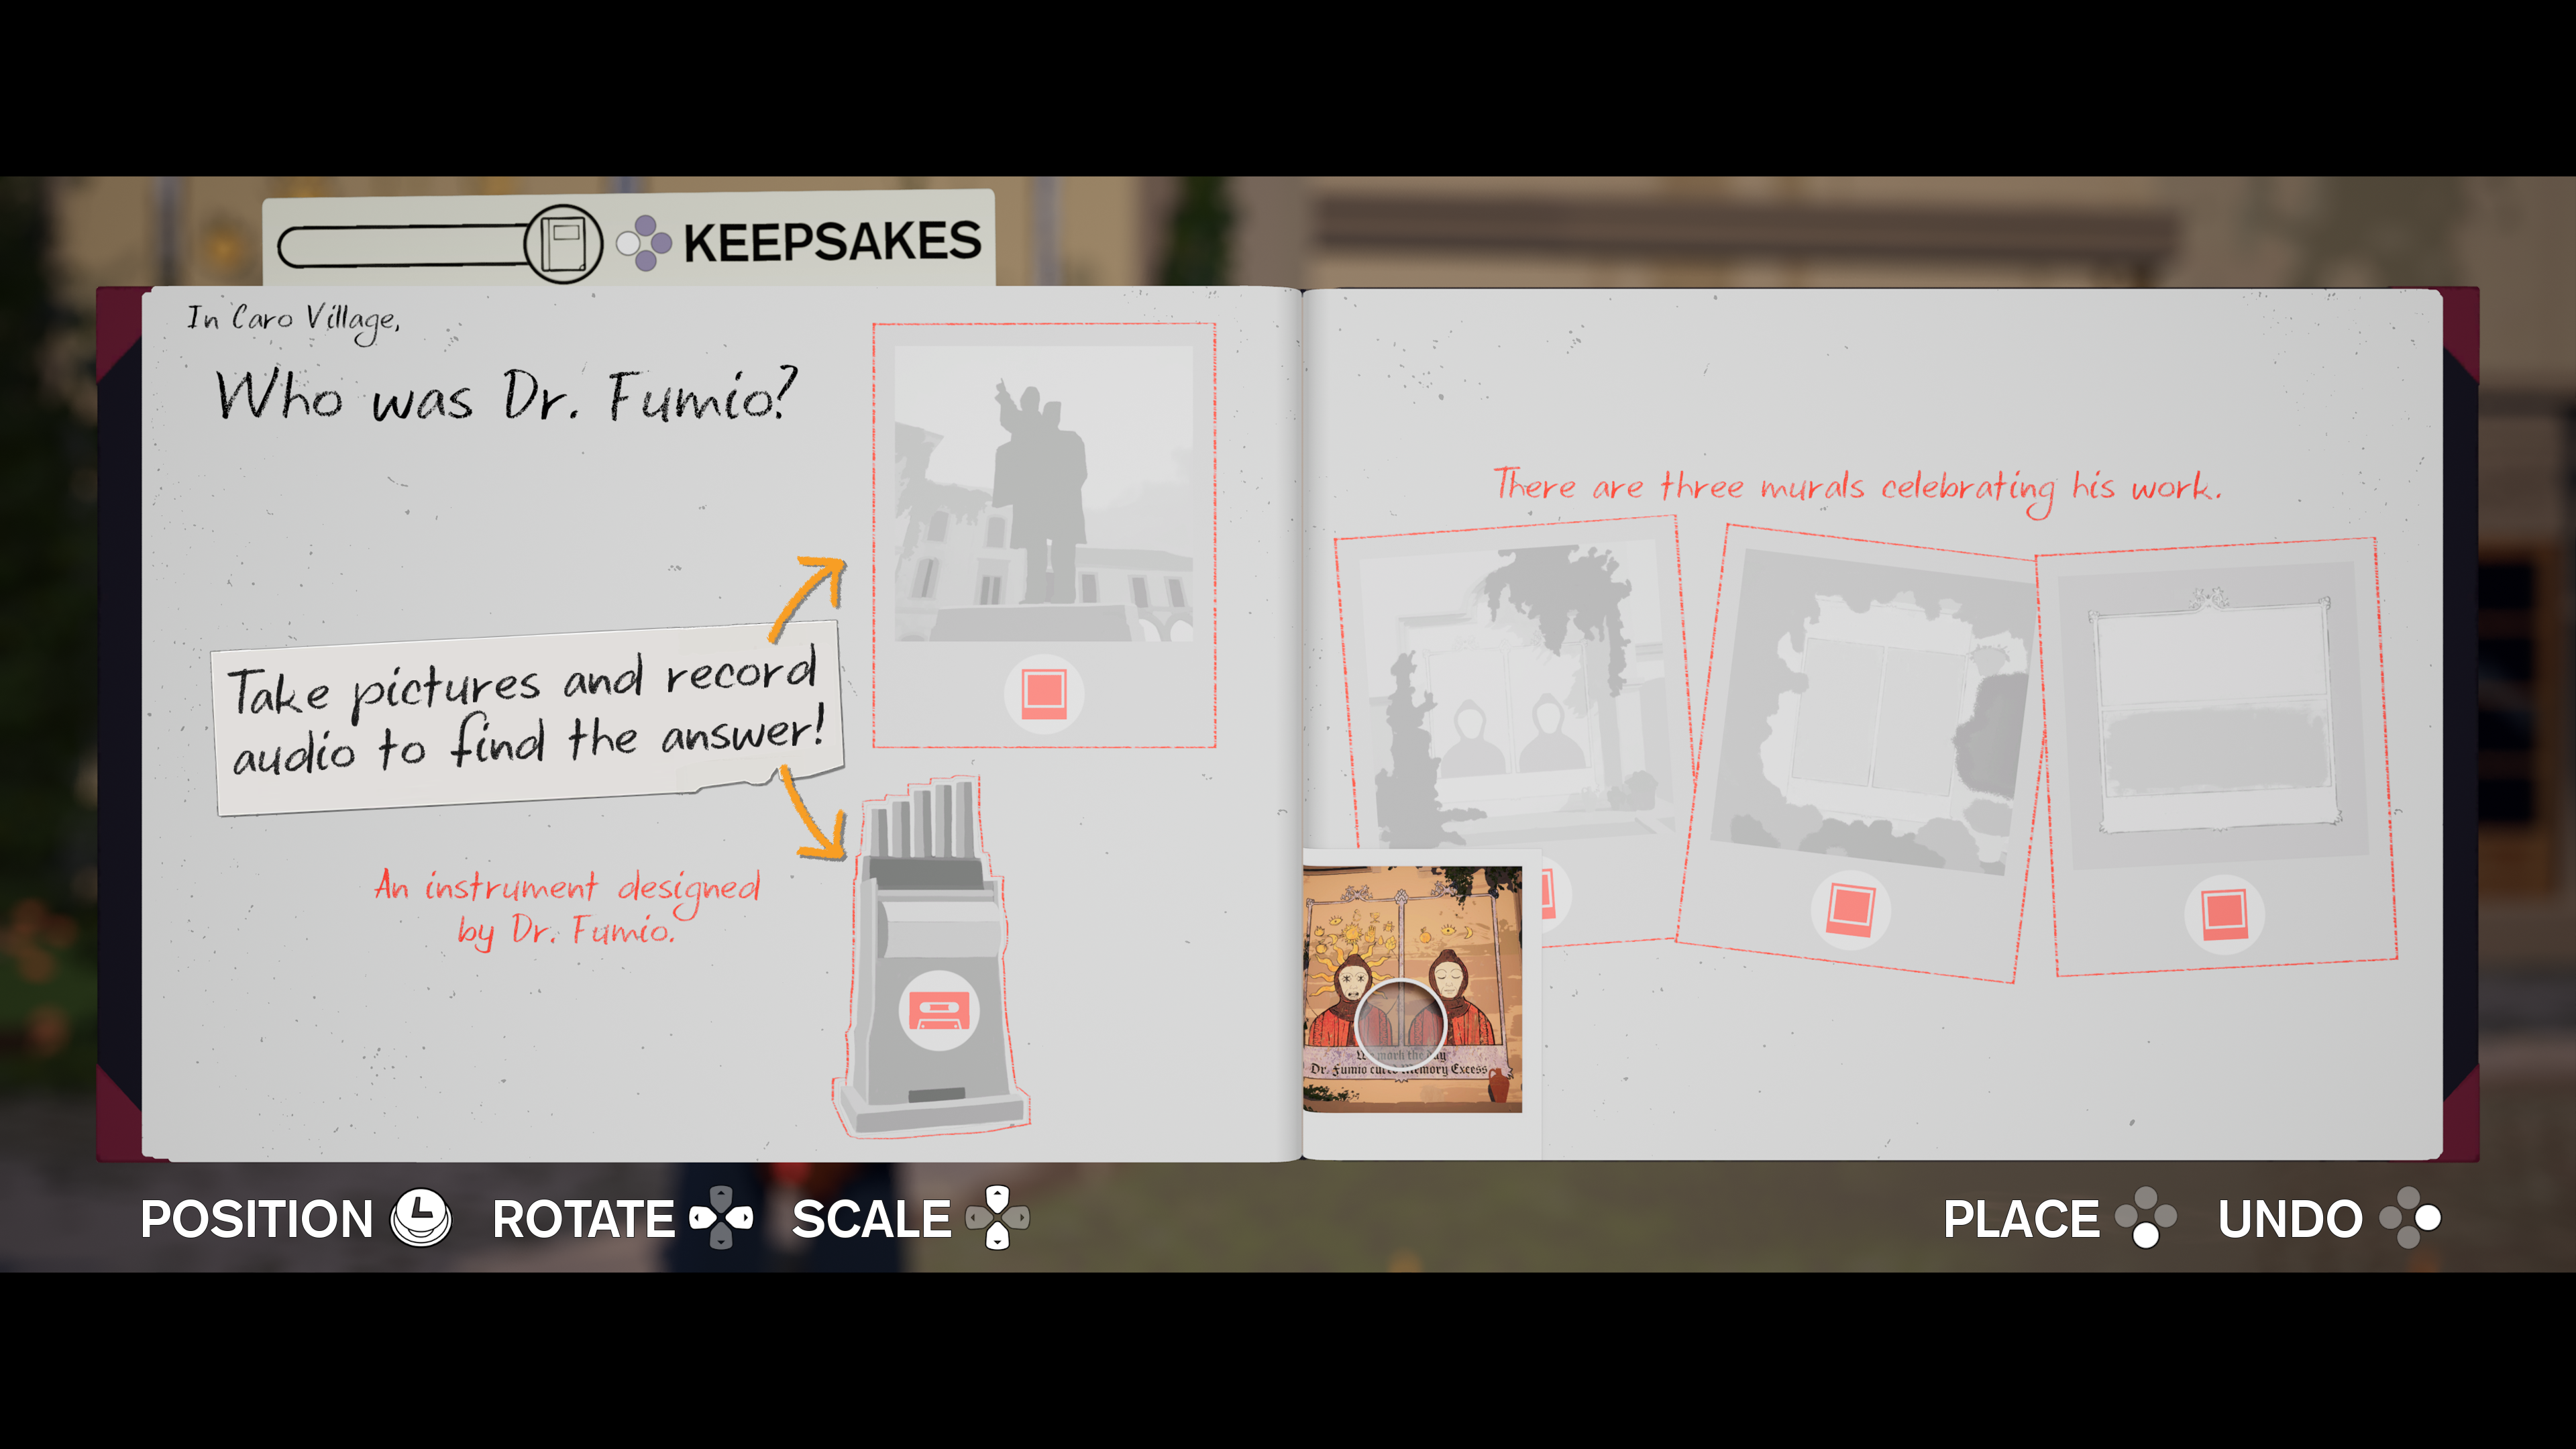 The player journal in Season A letter to the future. The journal is open on a double page (a tab at the top reads: "Keepsakes"). The first page reads: "In Caro Village - Who is Dr. Fumio?" below is an instruction to the player "Take pictures and record audio to find the answer". This is accompanied by watermarks that act as clues as to what to photograph and record. The second page shows 3 water marks of murals celebrating Dr.Fumio as the player moves one of the photos taken into its place